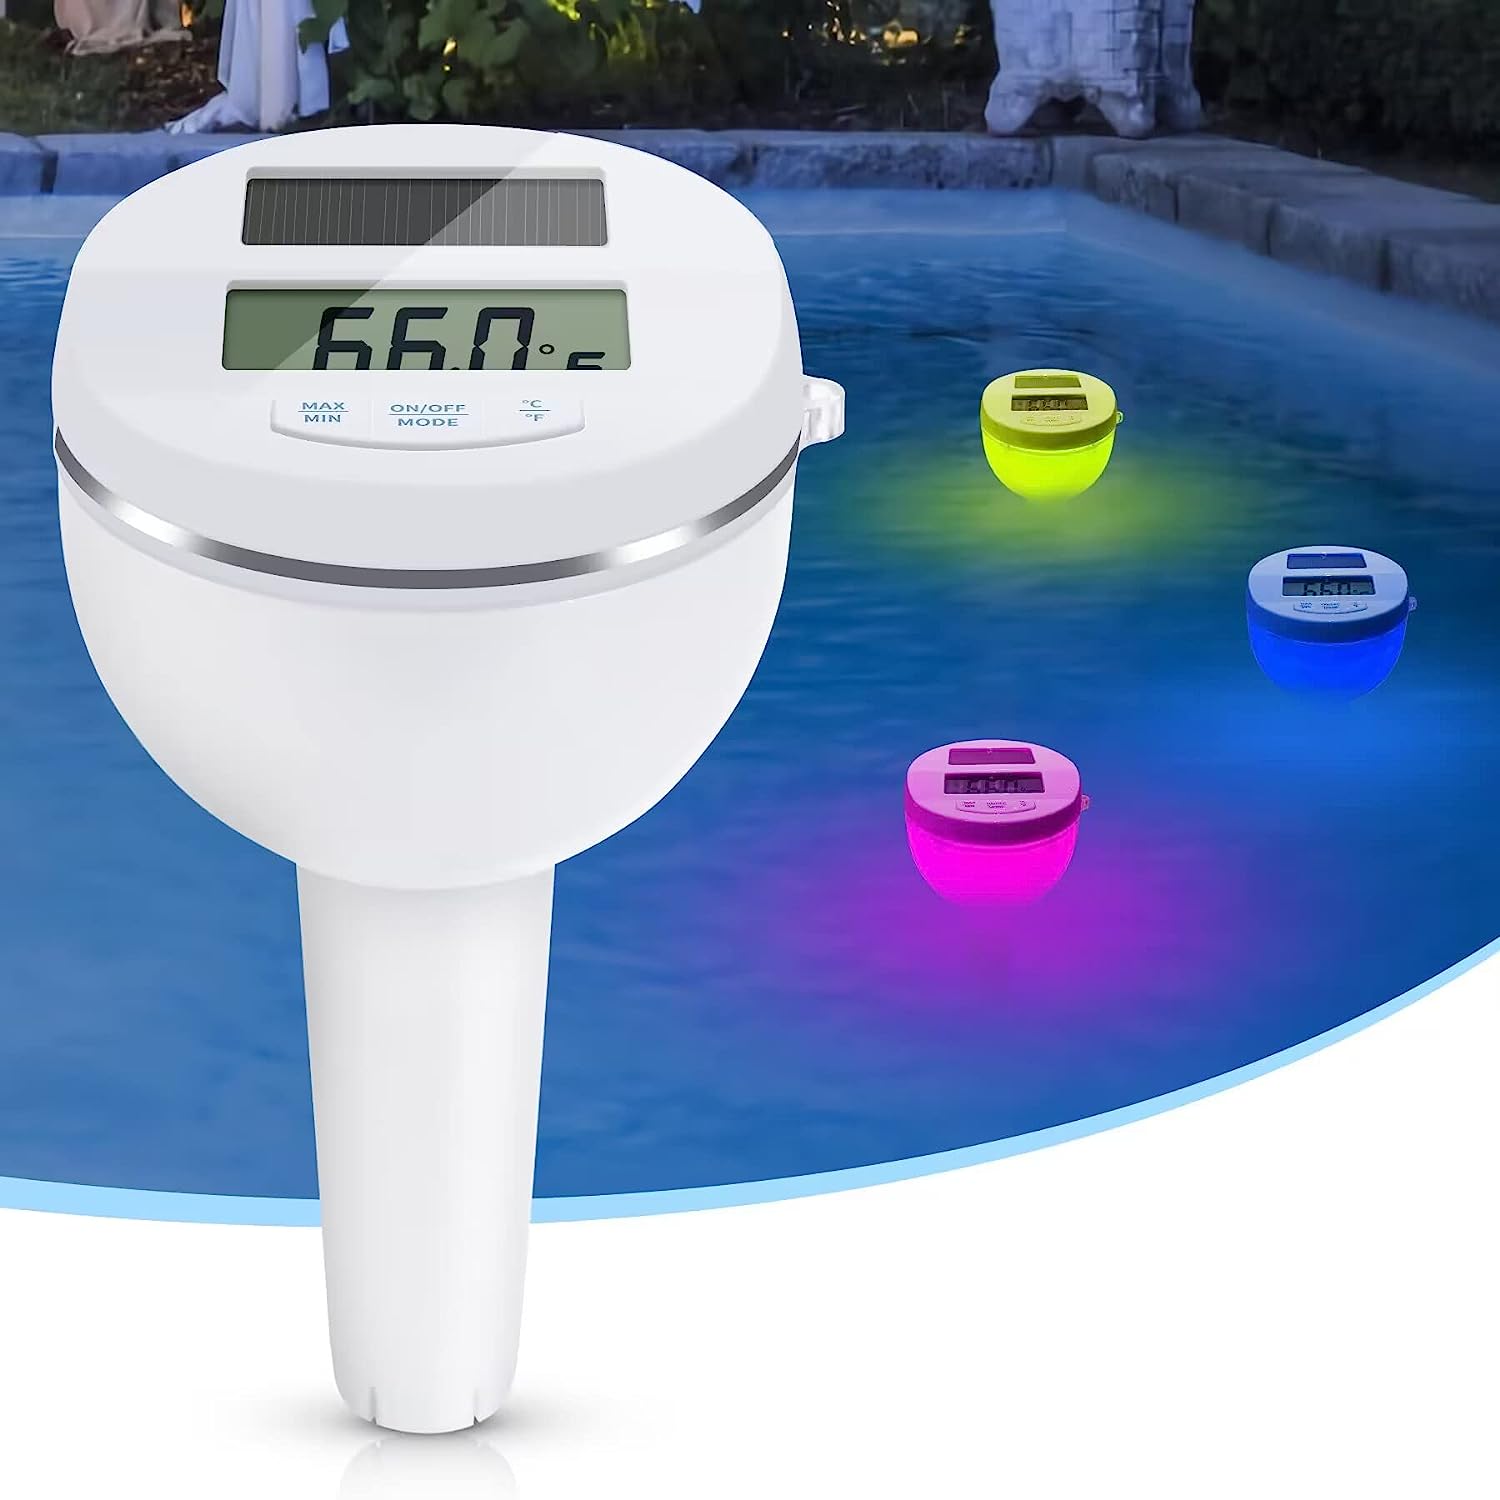 Digital Pool Thermometer, Solar Powered Floating Pool [...]